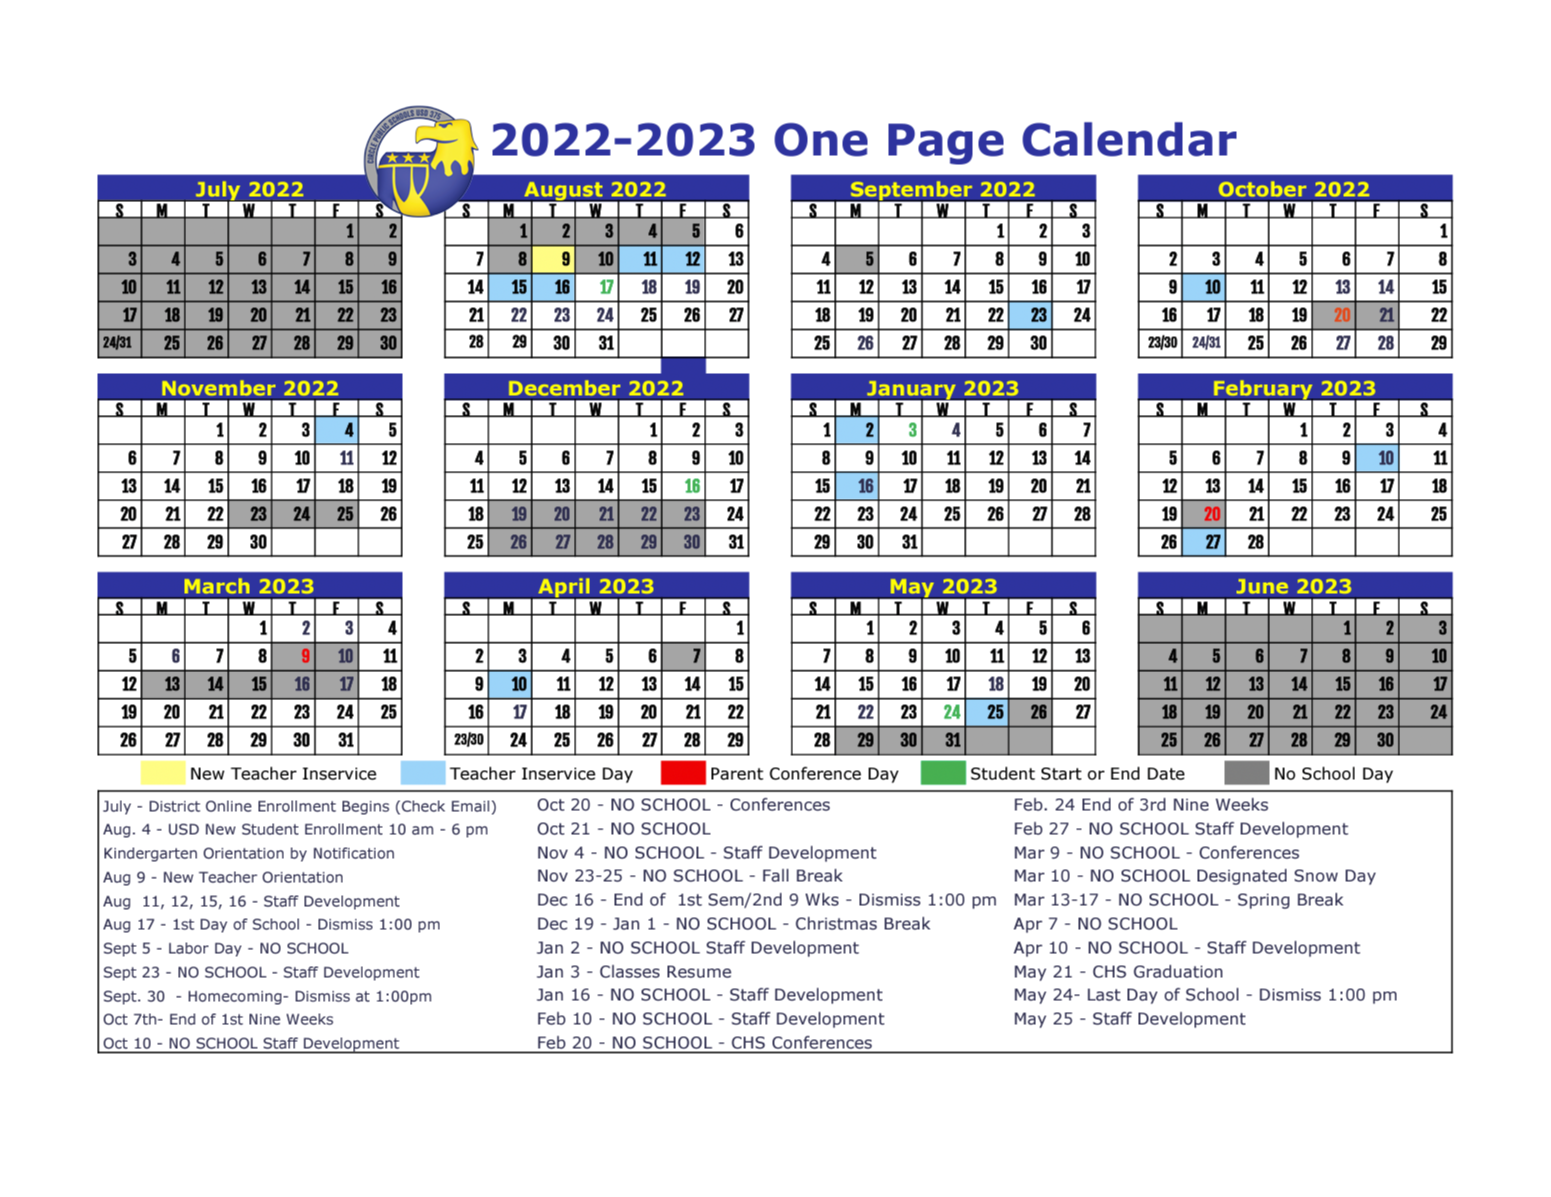 One Page Calendar